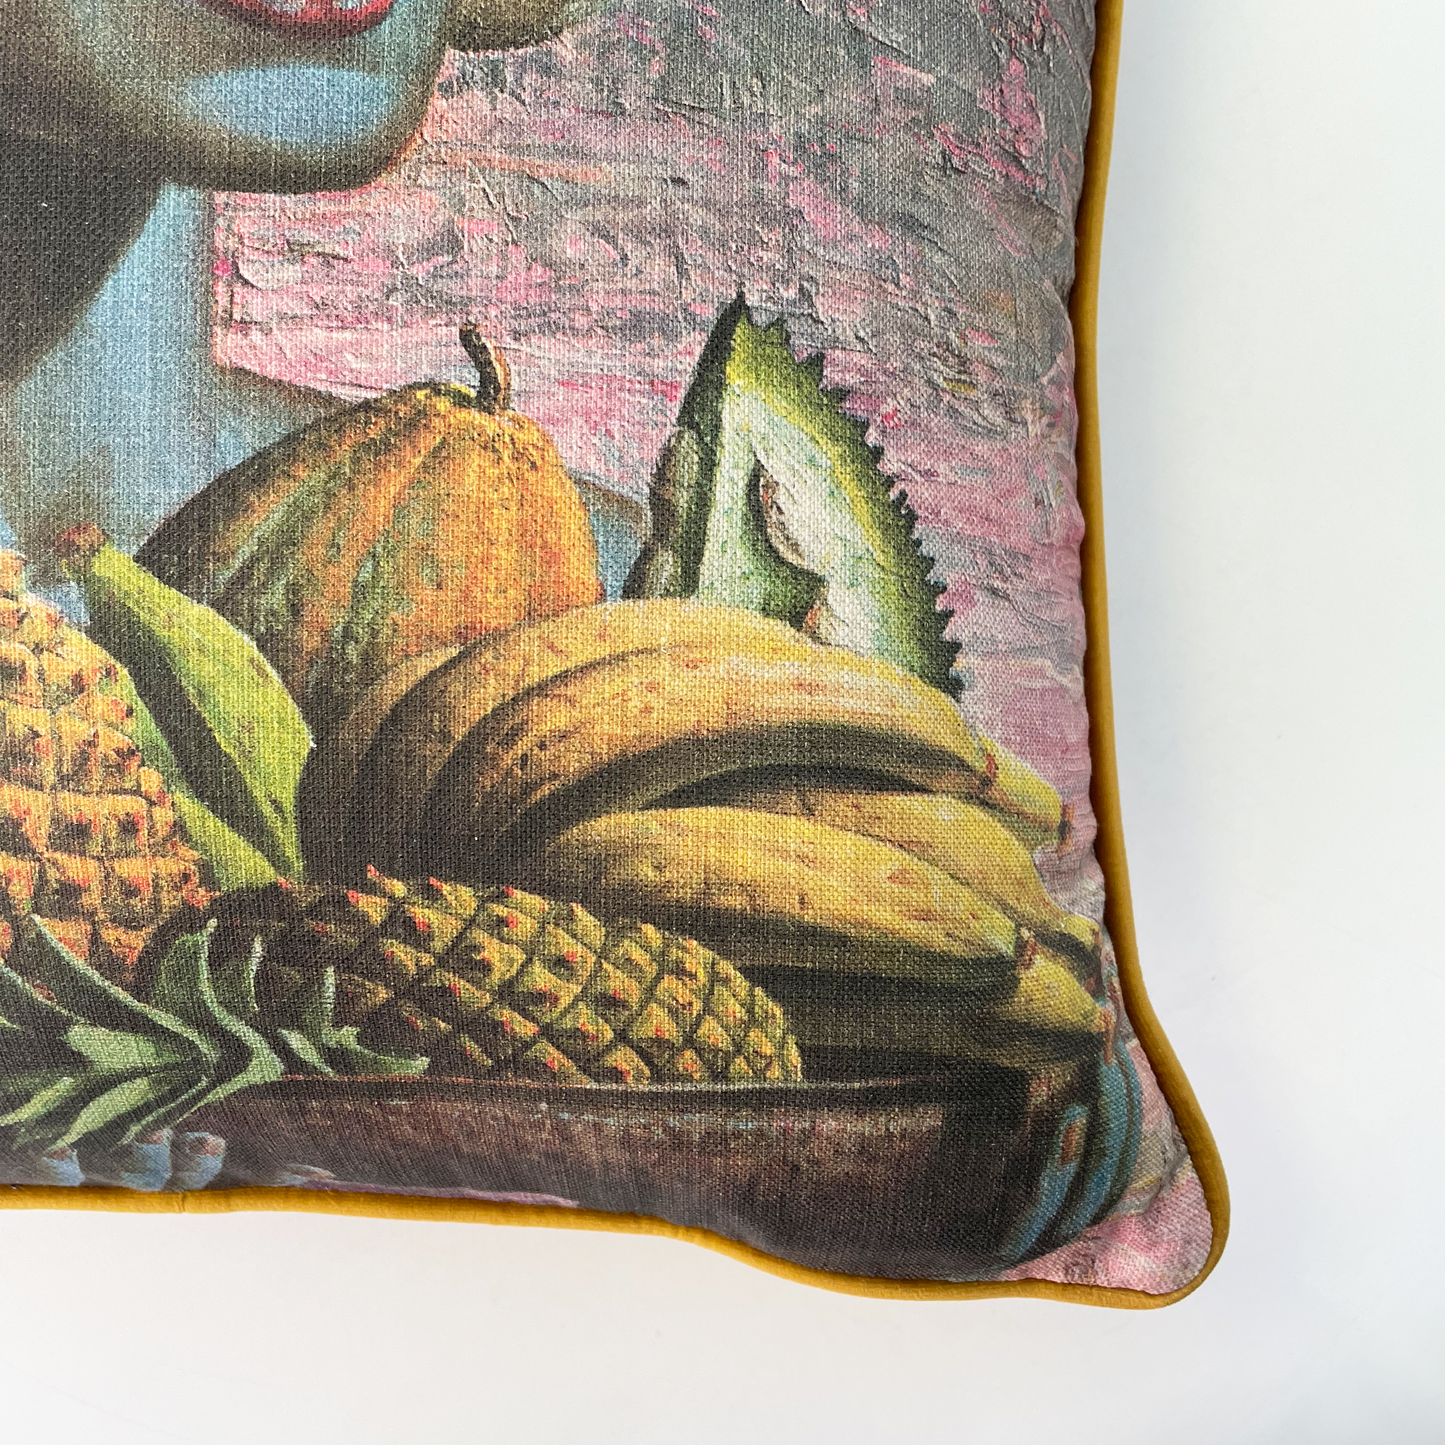 Fruits of Bali Square Cushion Cover - Tretchikoff